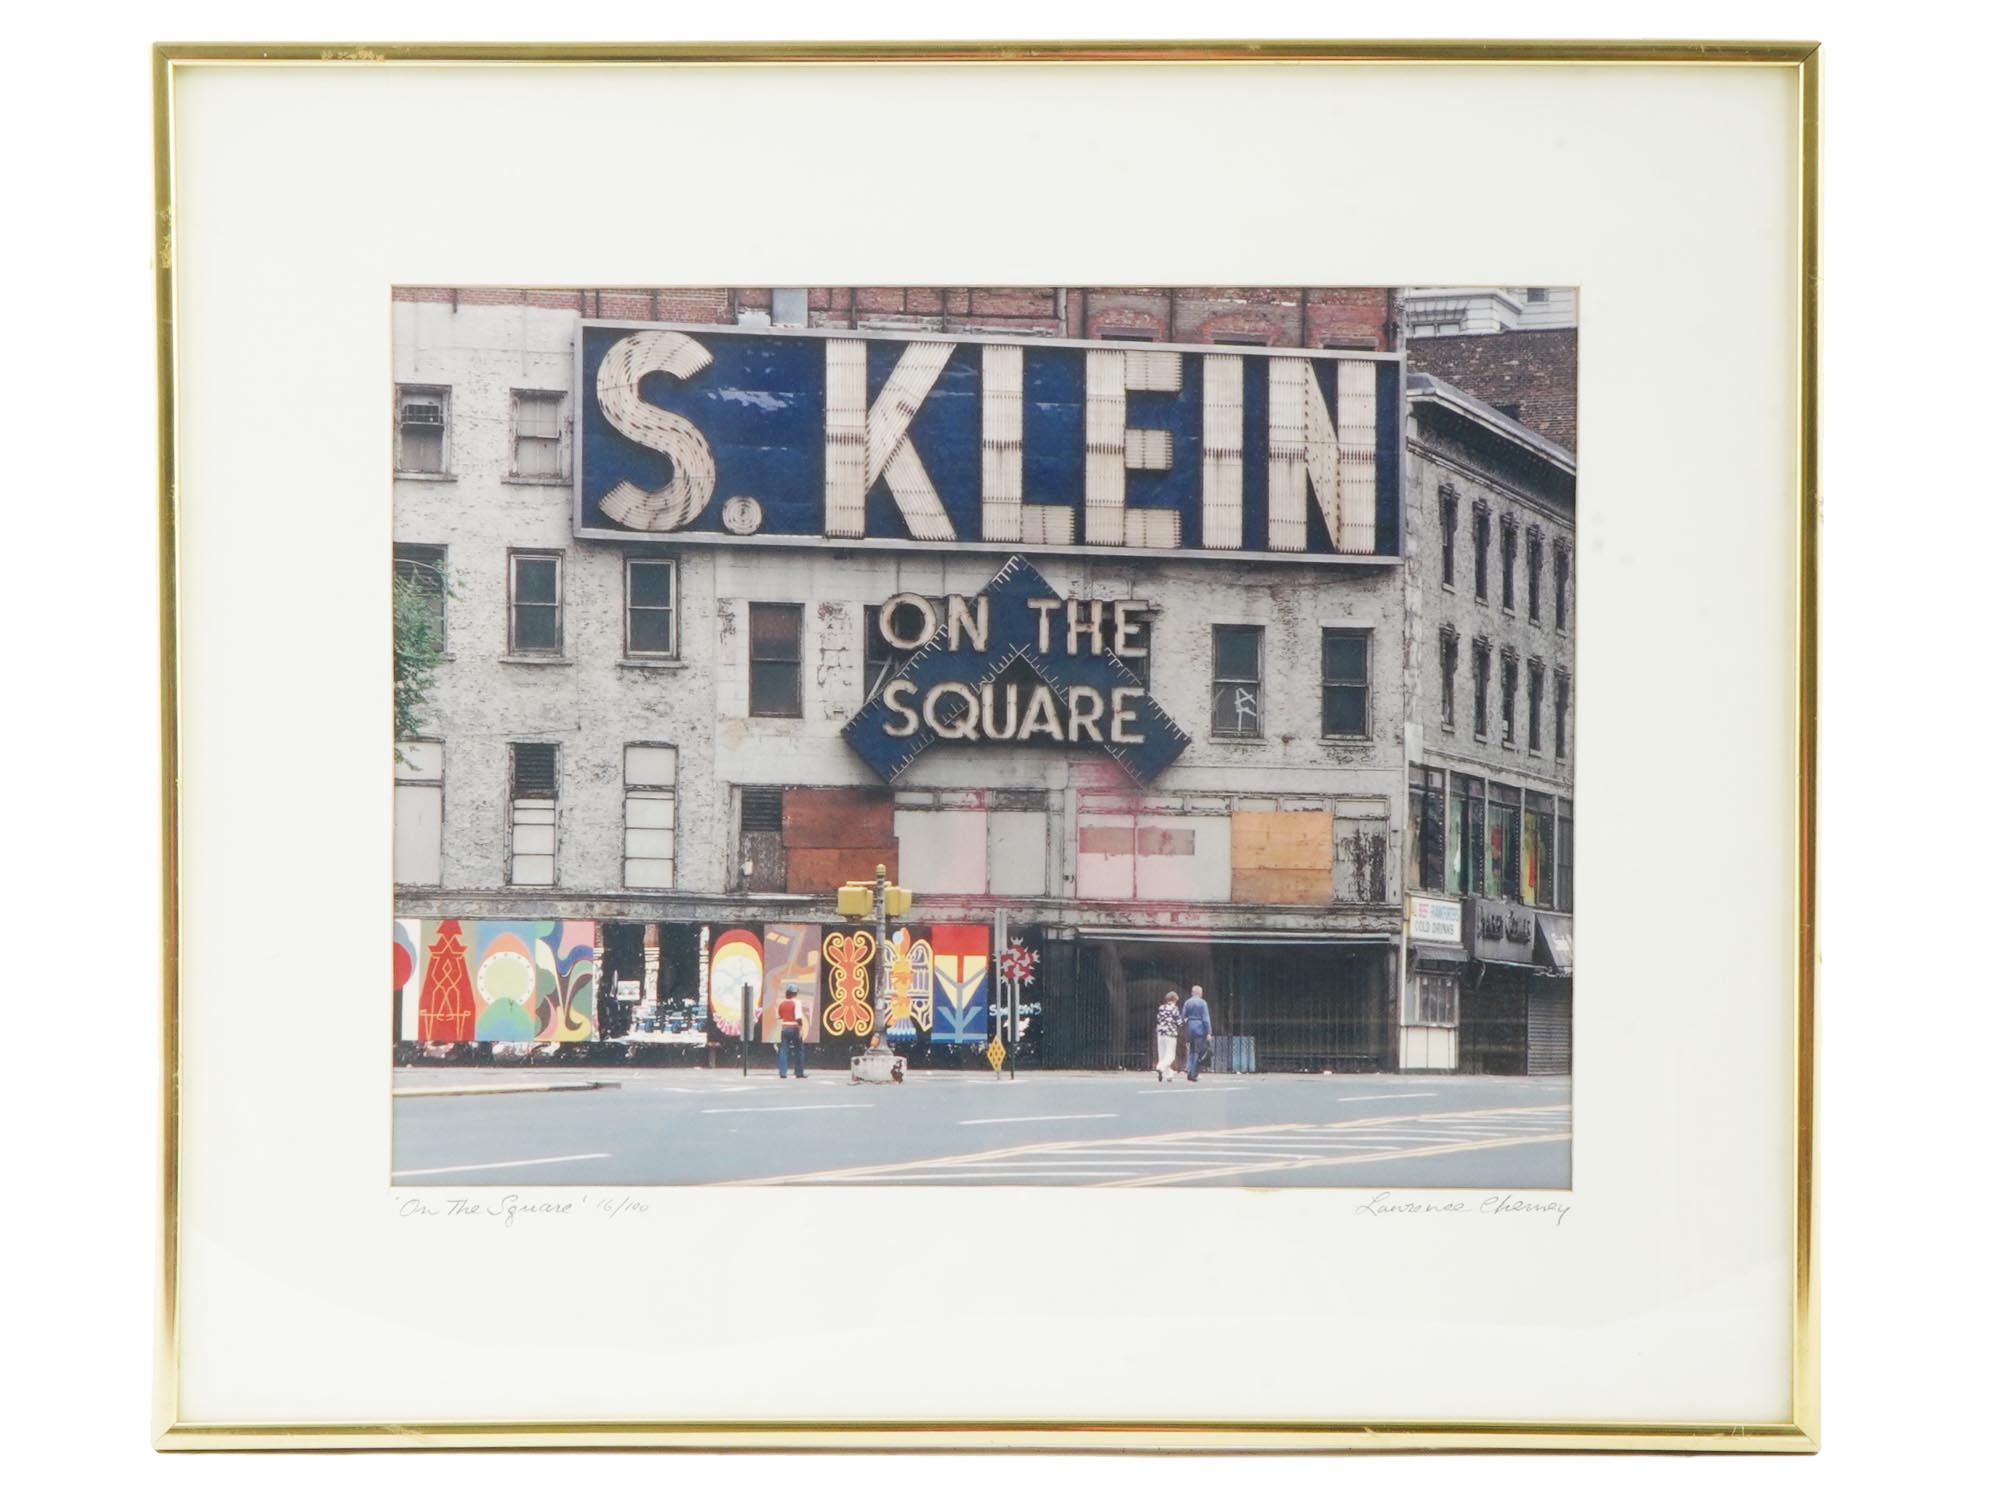 NYC S. KLEIN ON THE SQUARE PHOTO LAWRENCE CHENEY PIC-0